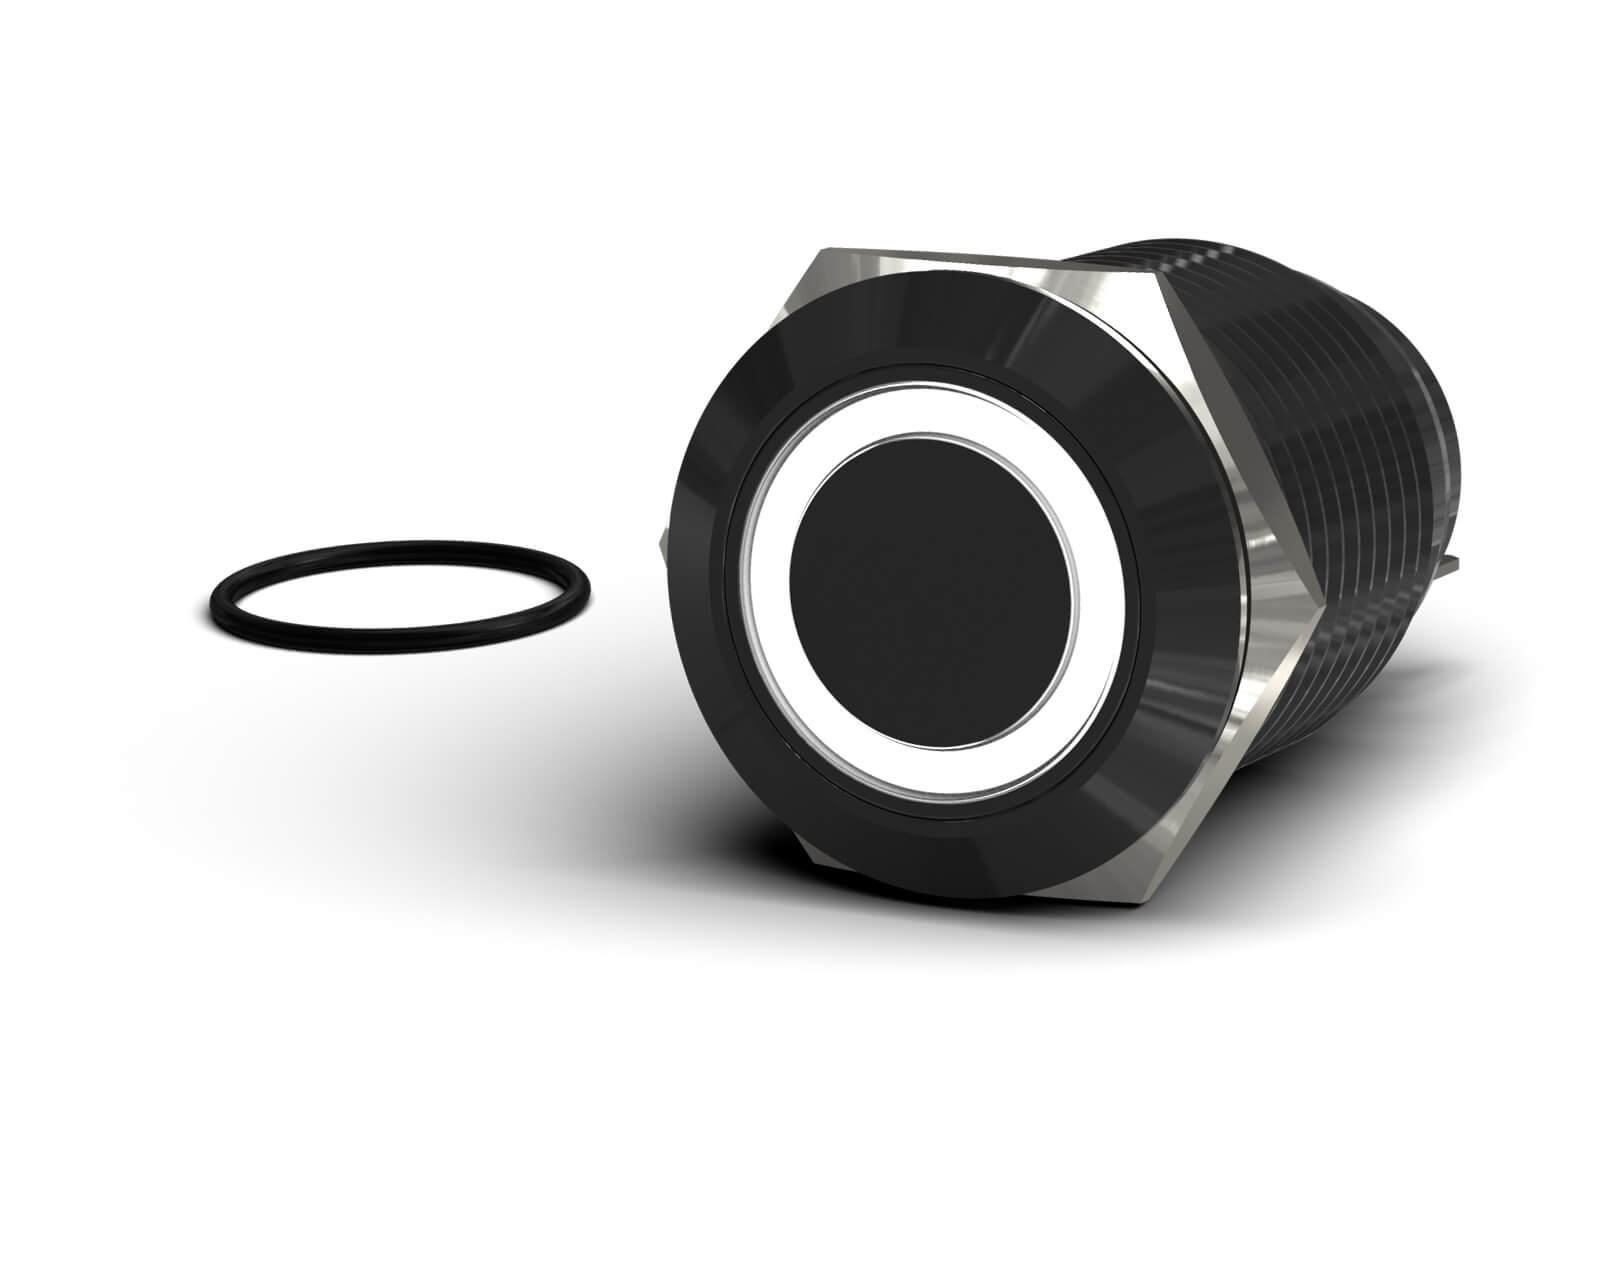 PrimoChill Black Aluminum Momentary Vandal Resistant Switch - 22mm - PrimoChill - KEEPING IT COOL White LED Ring